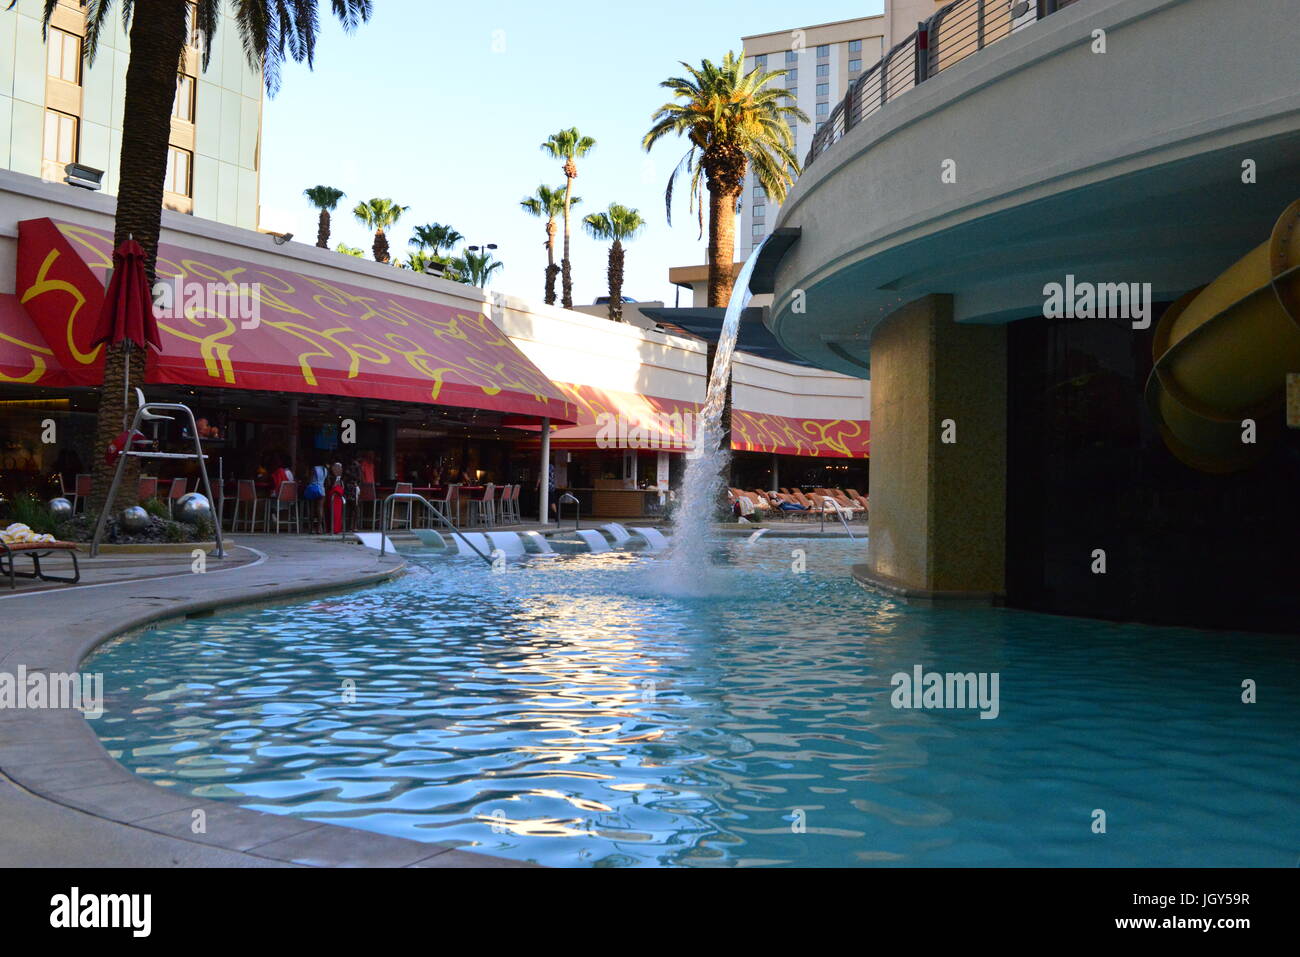 The pool area at a Hotel on Fremont street in Las Vegas Stock Photo